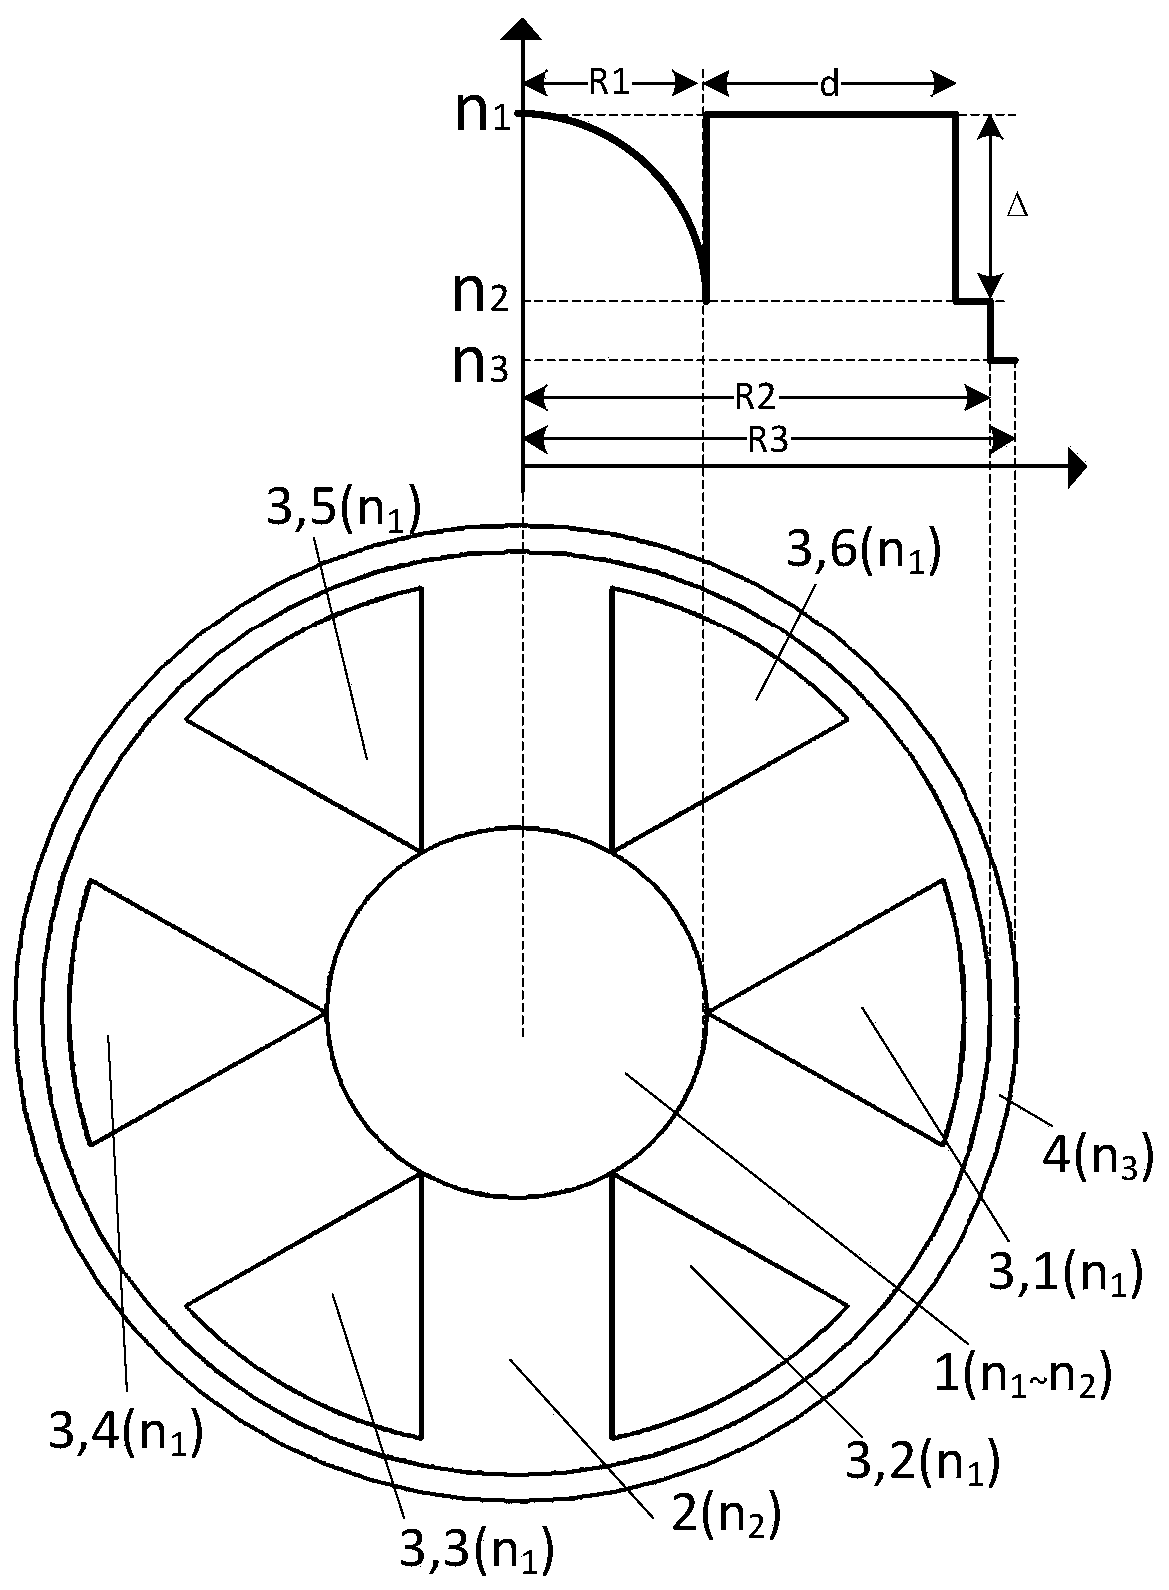 A large-mode-field bending-resistant single-mode fiber with parabolic cores coupled with lobe-shaped cores